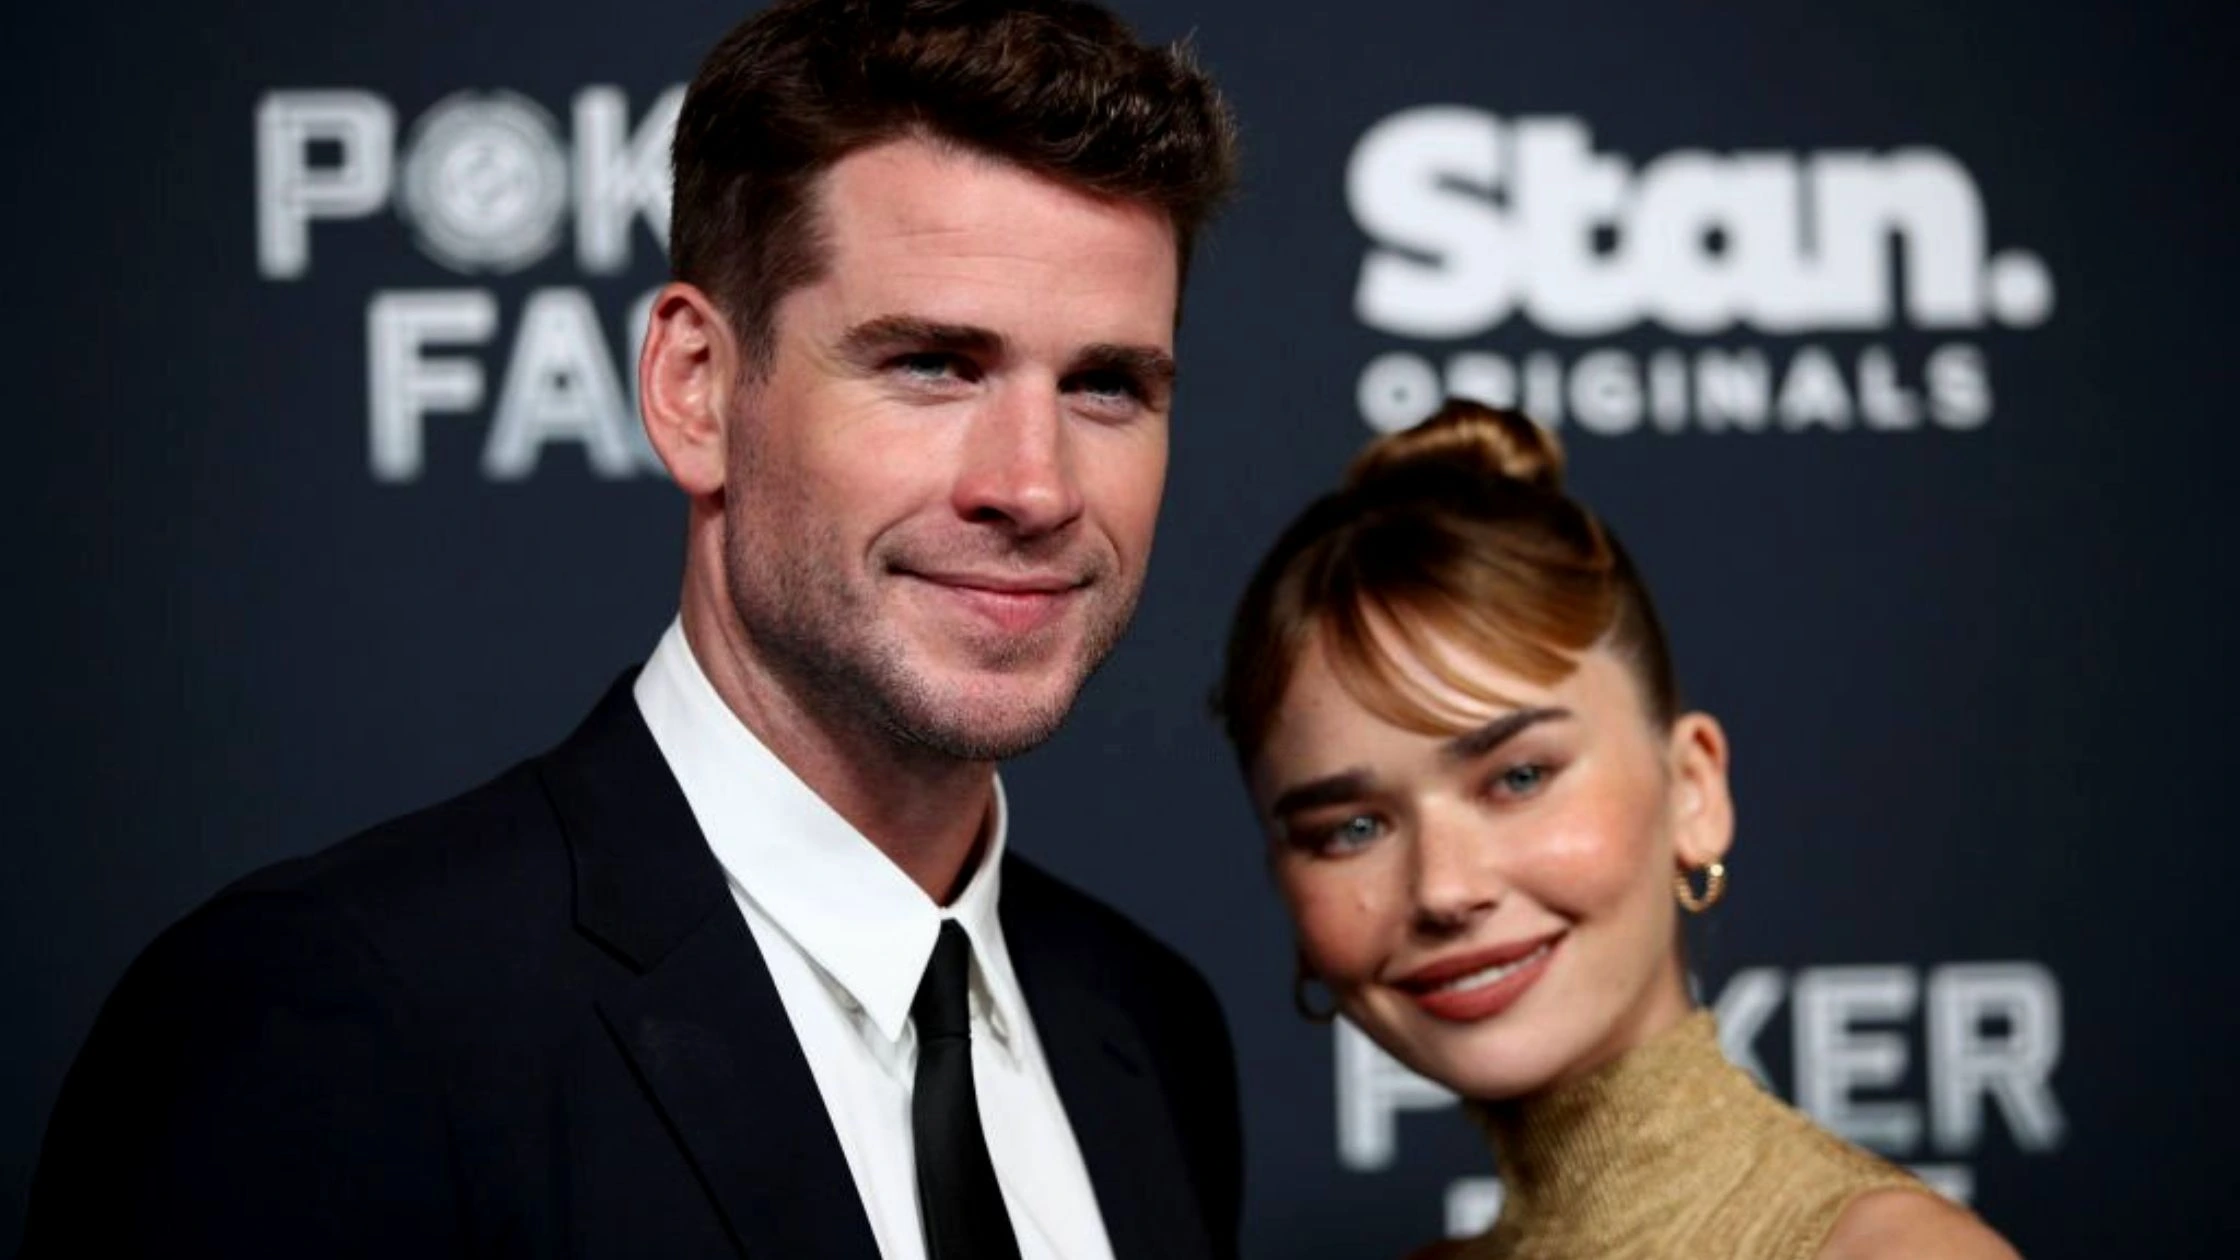 Liam Hemsworth Spotted With Long-Time Girlfriend Gabriella Brooks After Release Of Miley’s ‘Flowers’